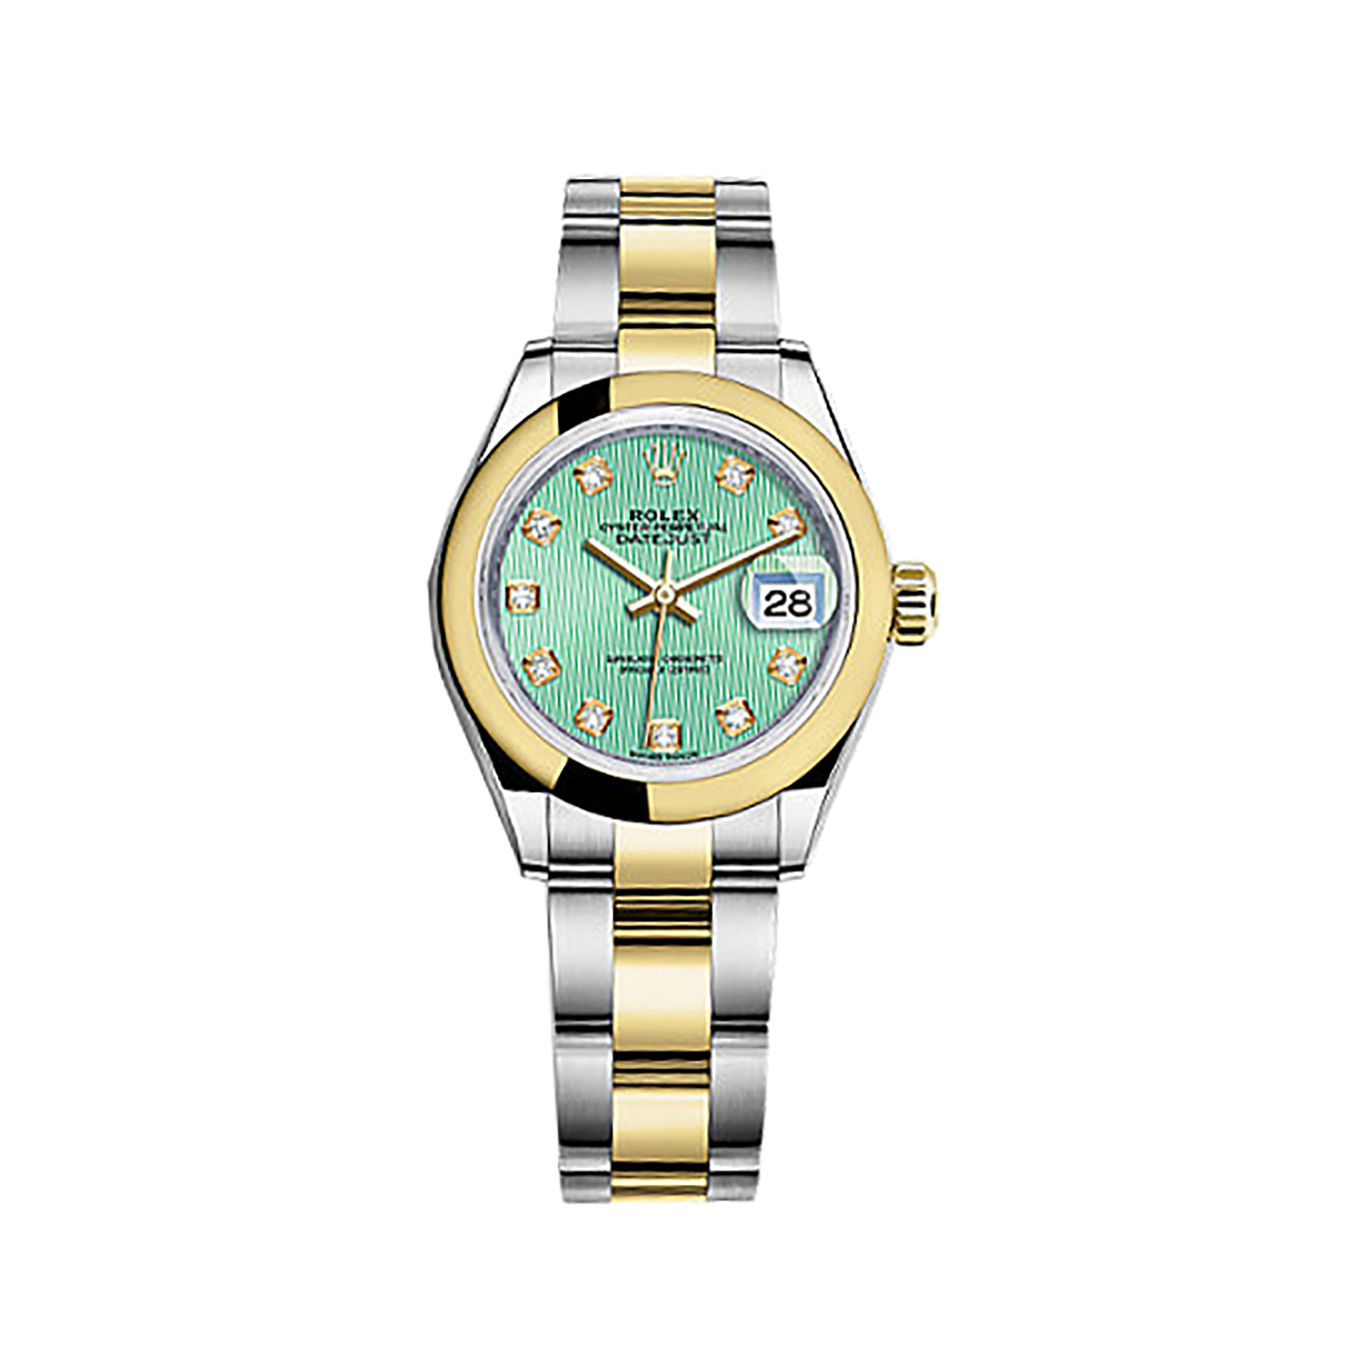 Lady-Datejust 28 279163 Gold & Stainless Steel Watch (Mint Green Set with Diamonds)